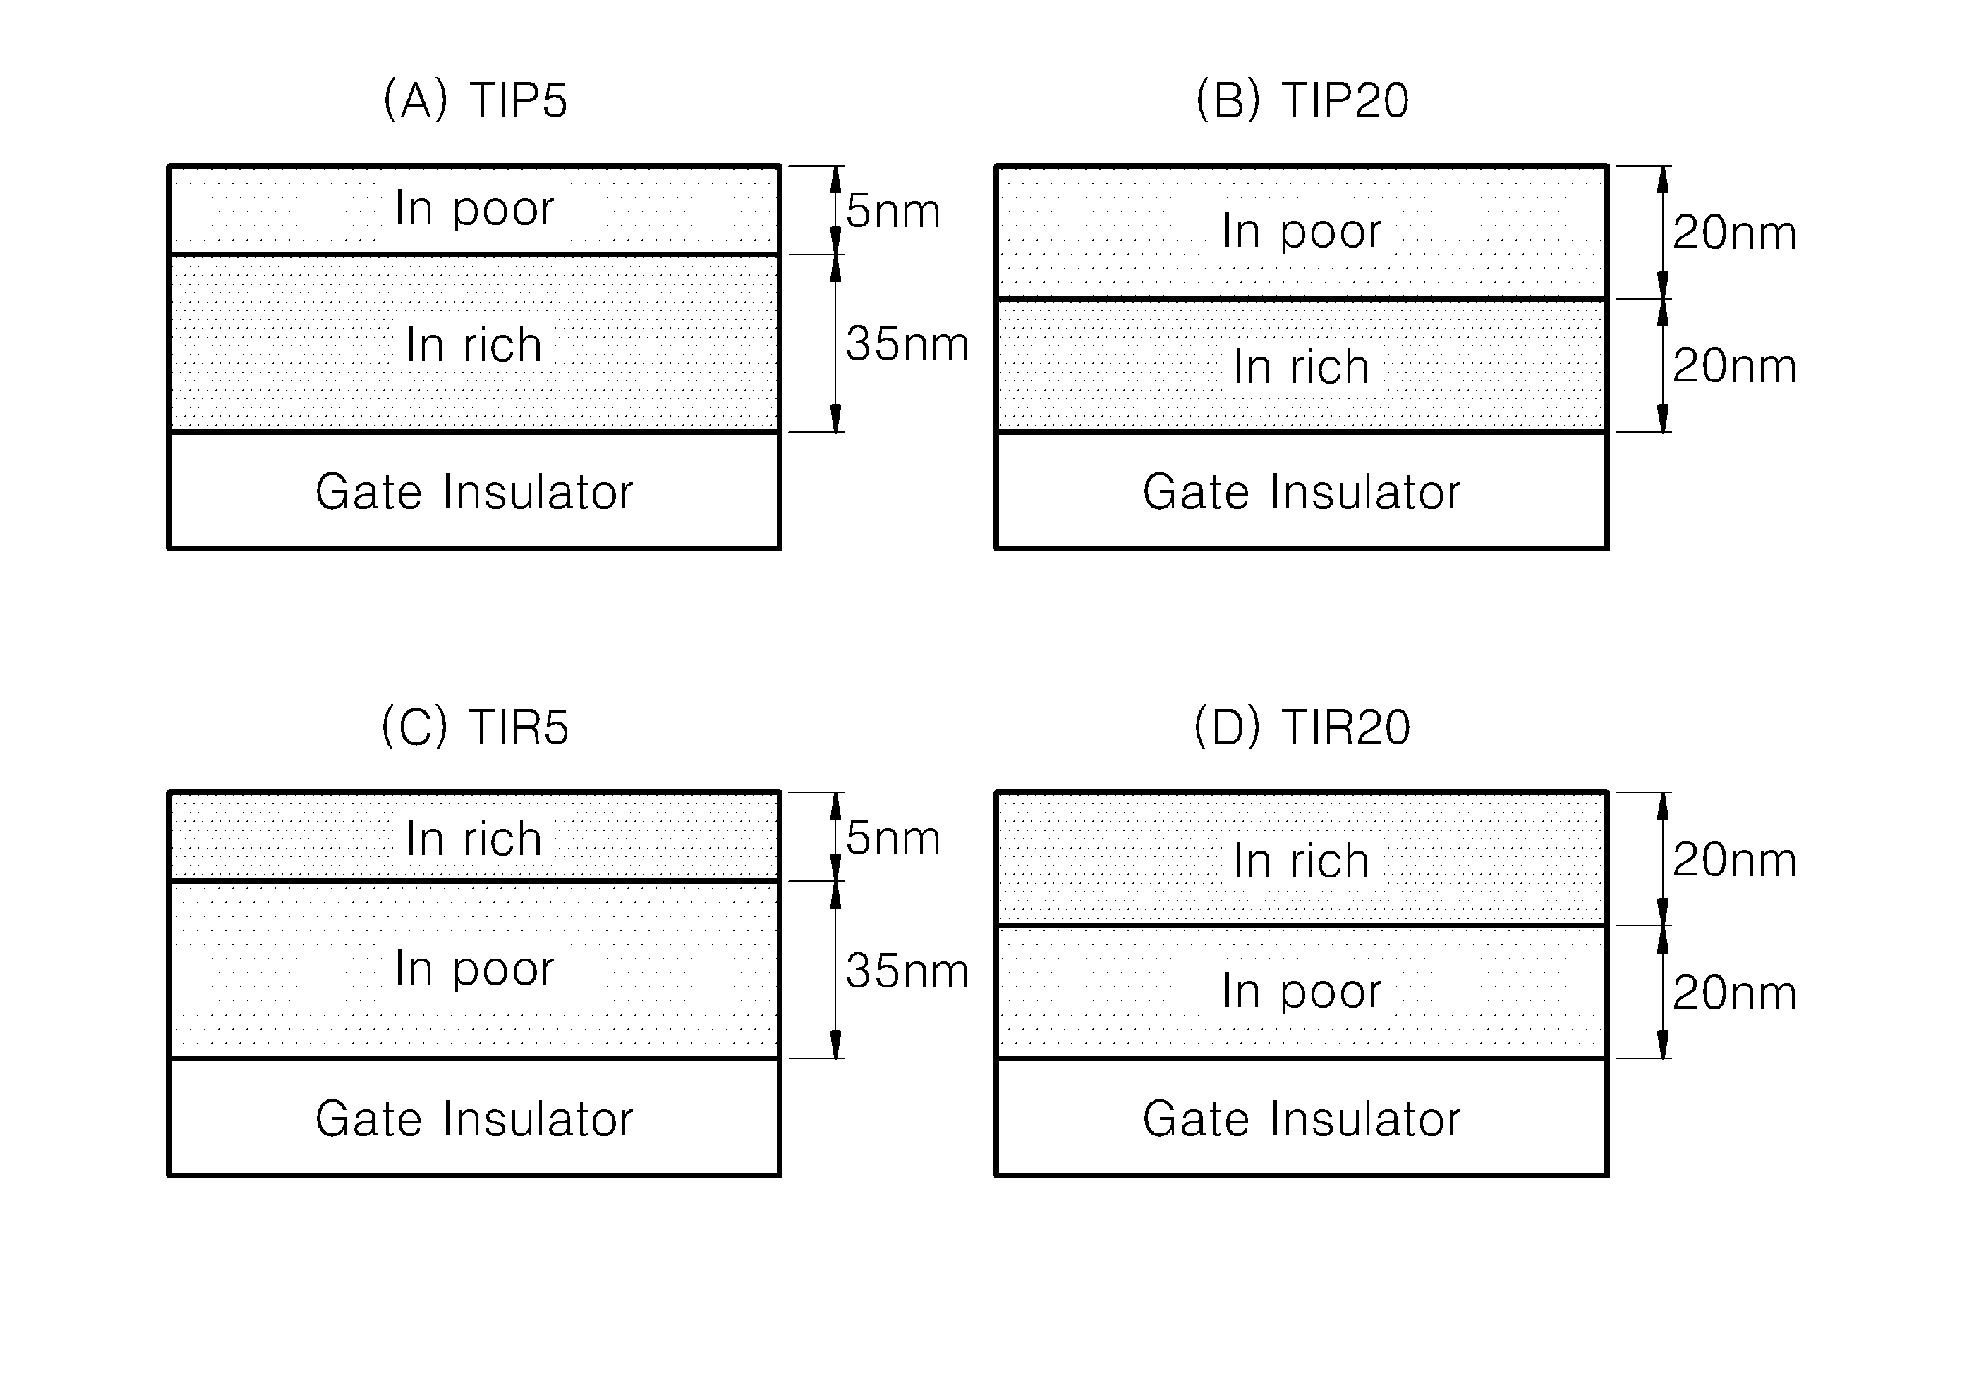 Transistors, methods of manufacturing the same and electronic devices including transistors